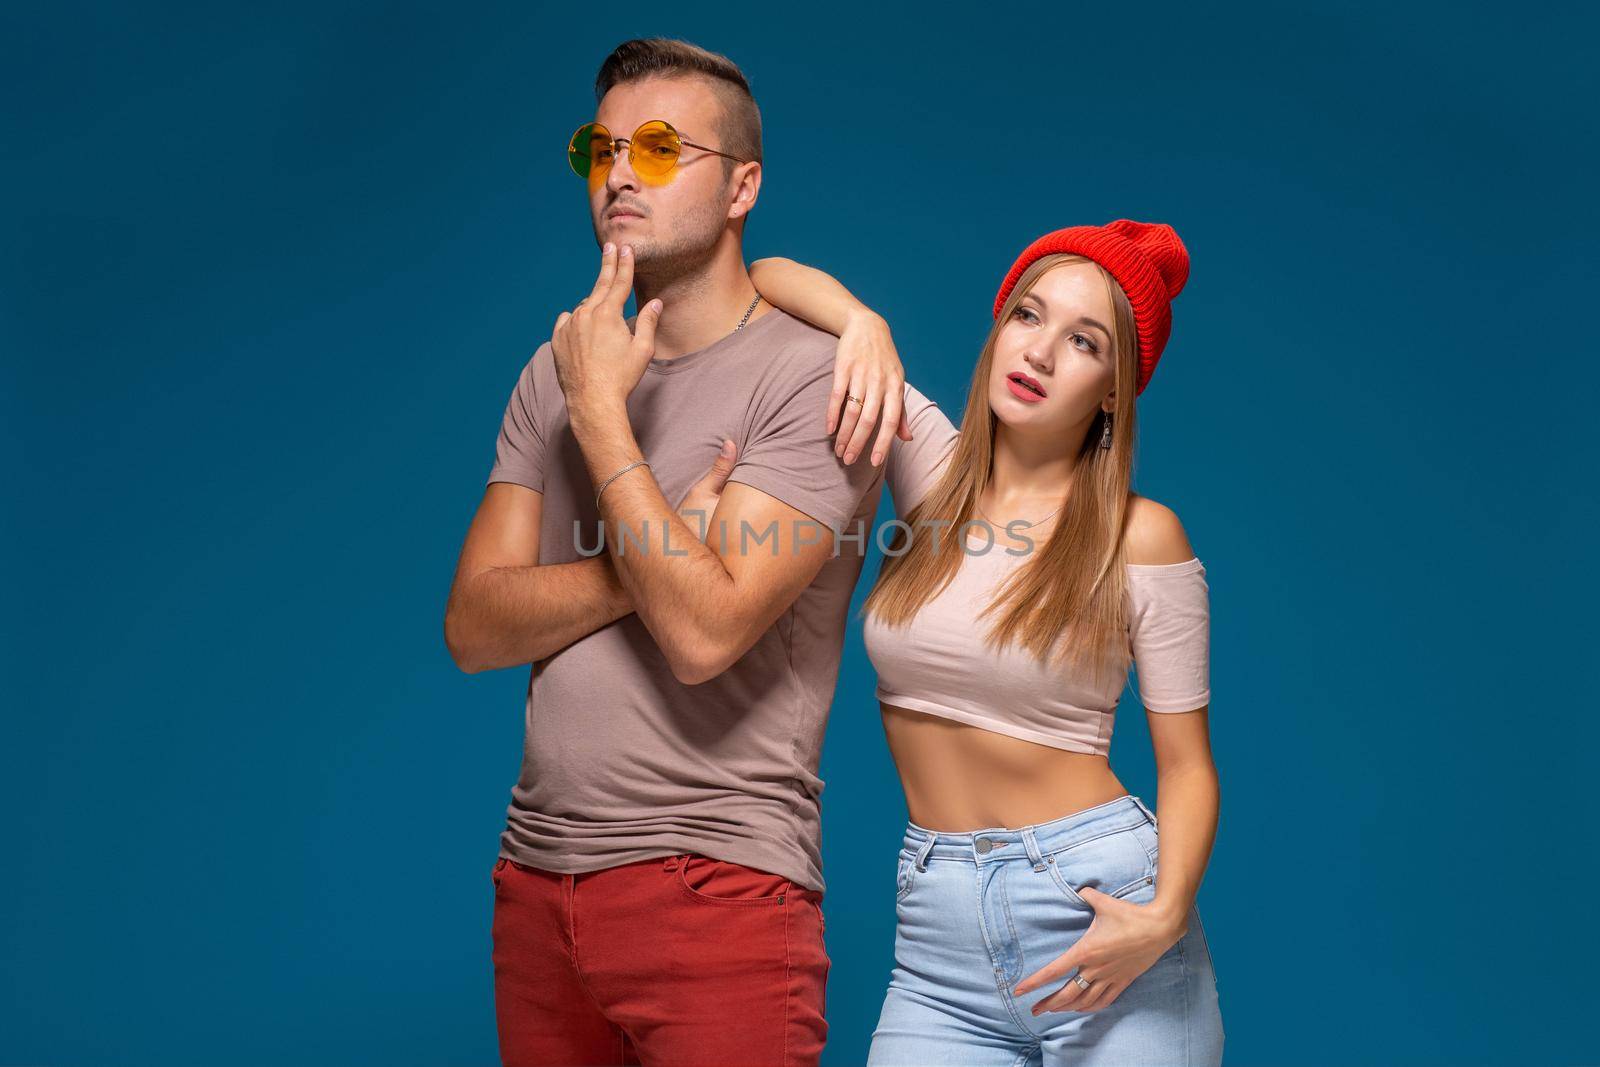 Studio lifestyle portrait of two best friends hipster wearing stylish bright outfits, hats, denim shorts and glasses, going crazy and having great time together. Indoor studio shot, isolated on blue background.